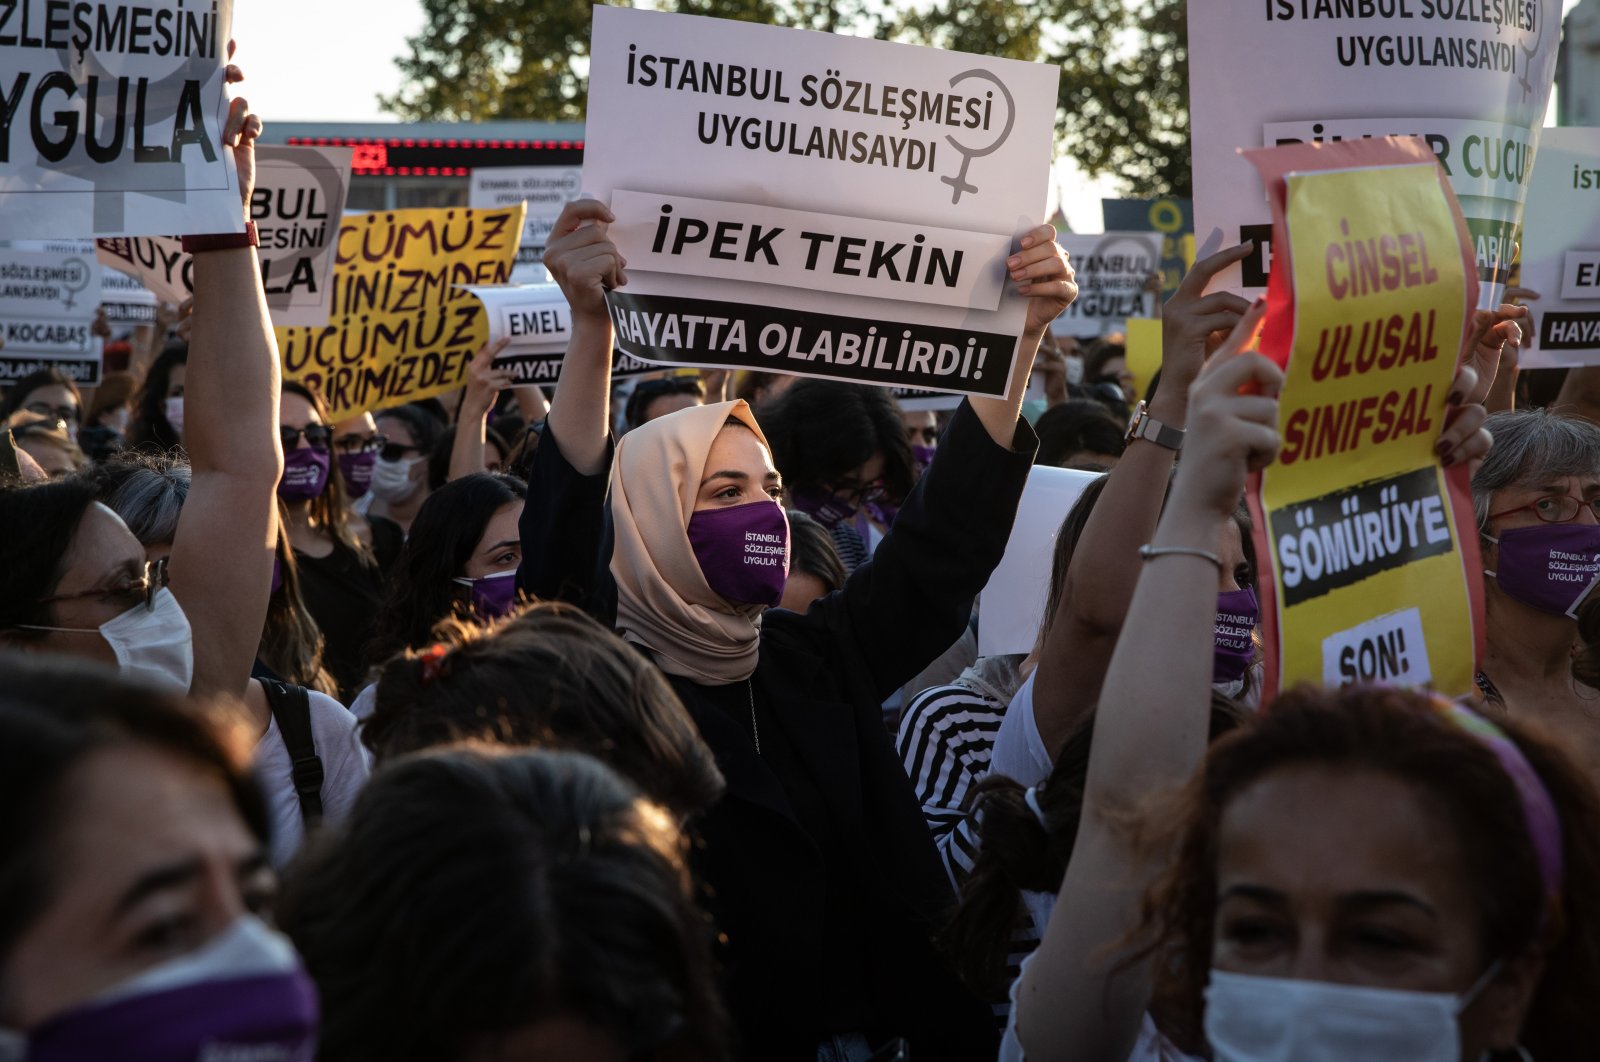 A woman holds a sign that reads "İpek Tekin could have been alive if Istanbul Convention was implemented" during a women's rights protest in Istanbul, Turkey, Aug. 5, 2020. (Getty Images) 